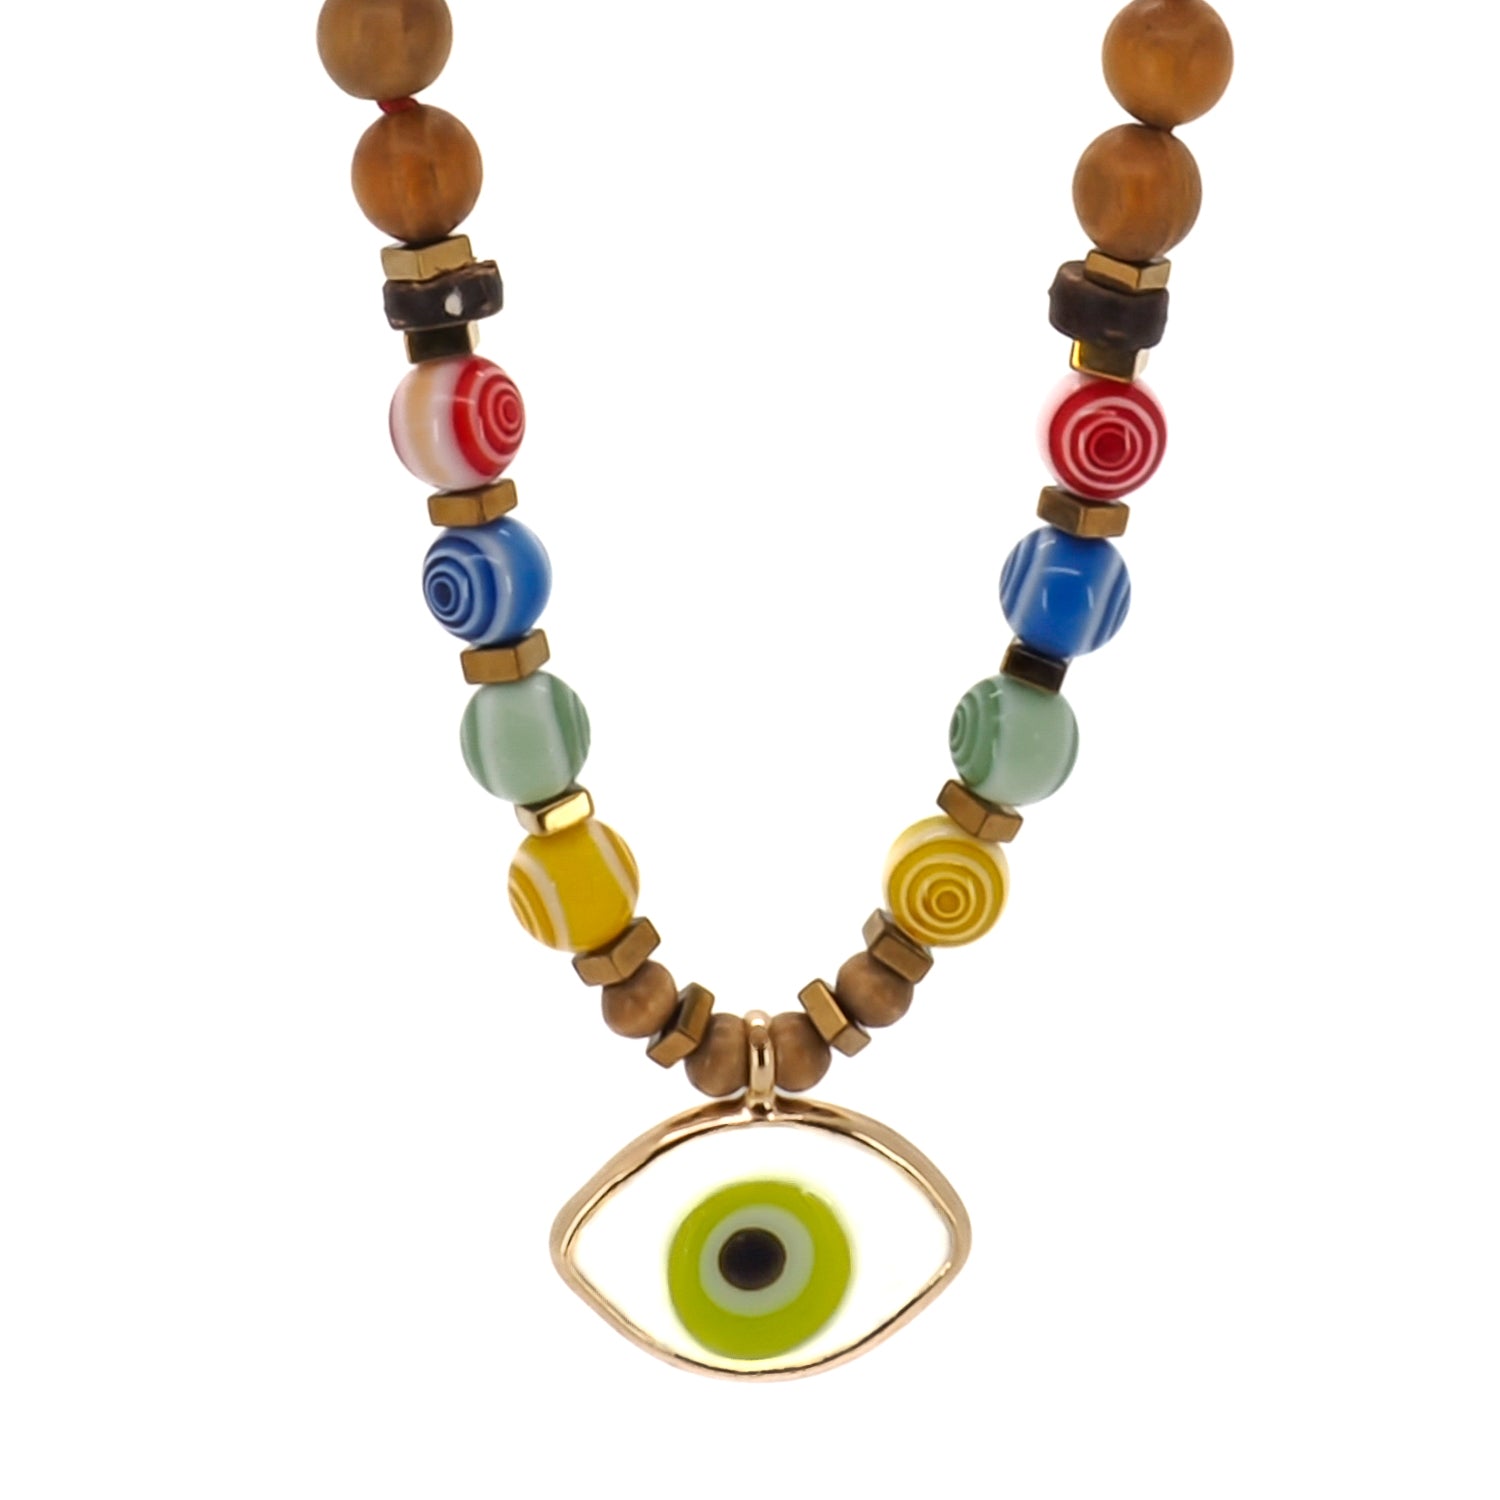 A vibrant Green Eye Beaded Necklace featuring a mix of blue, yellow, red, and green glass evil eye beads. 